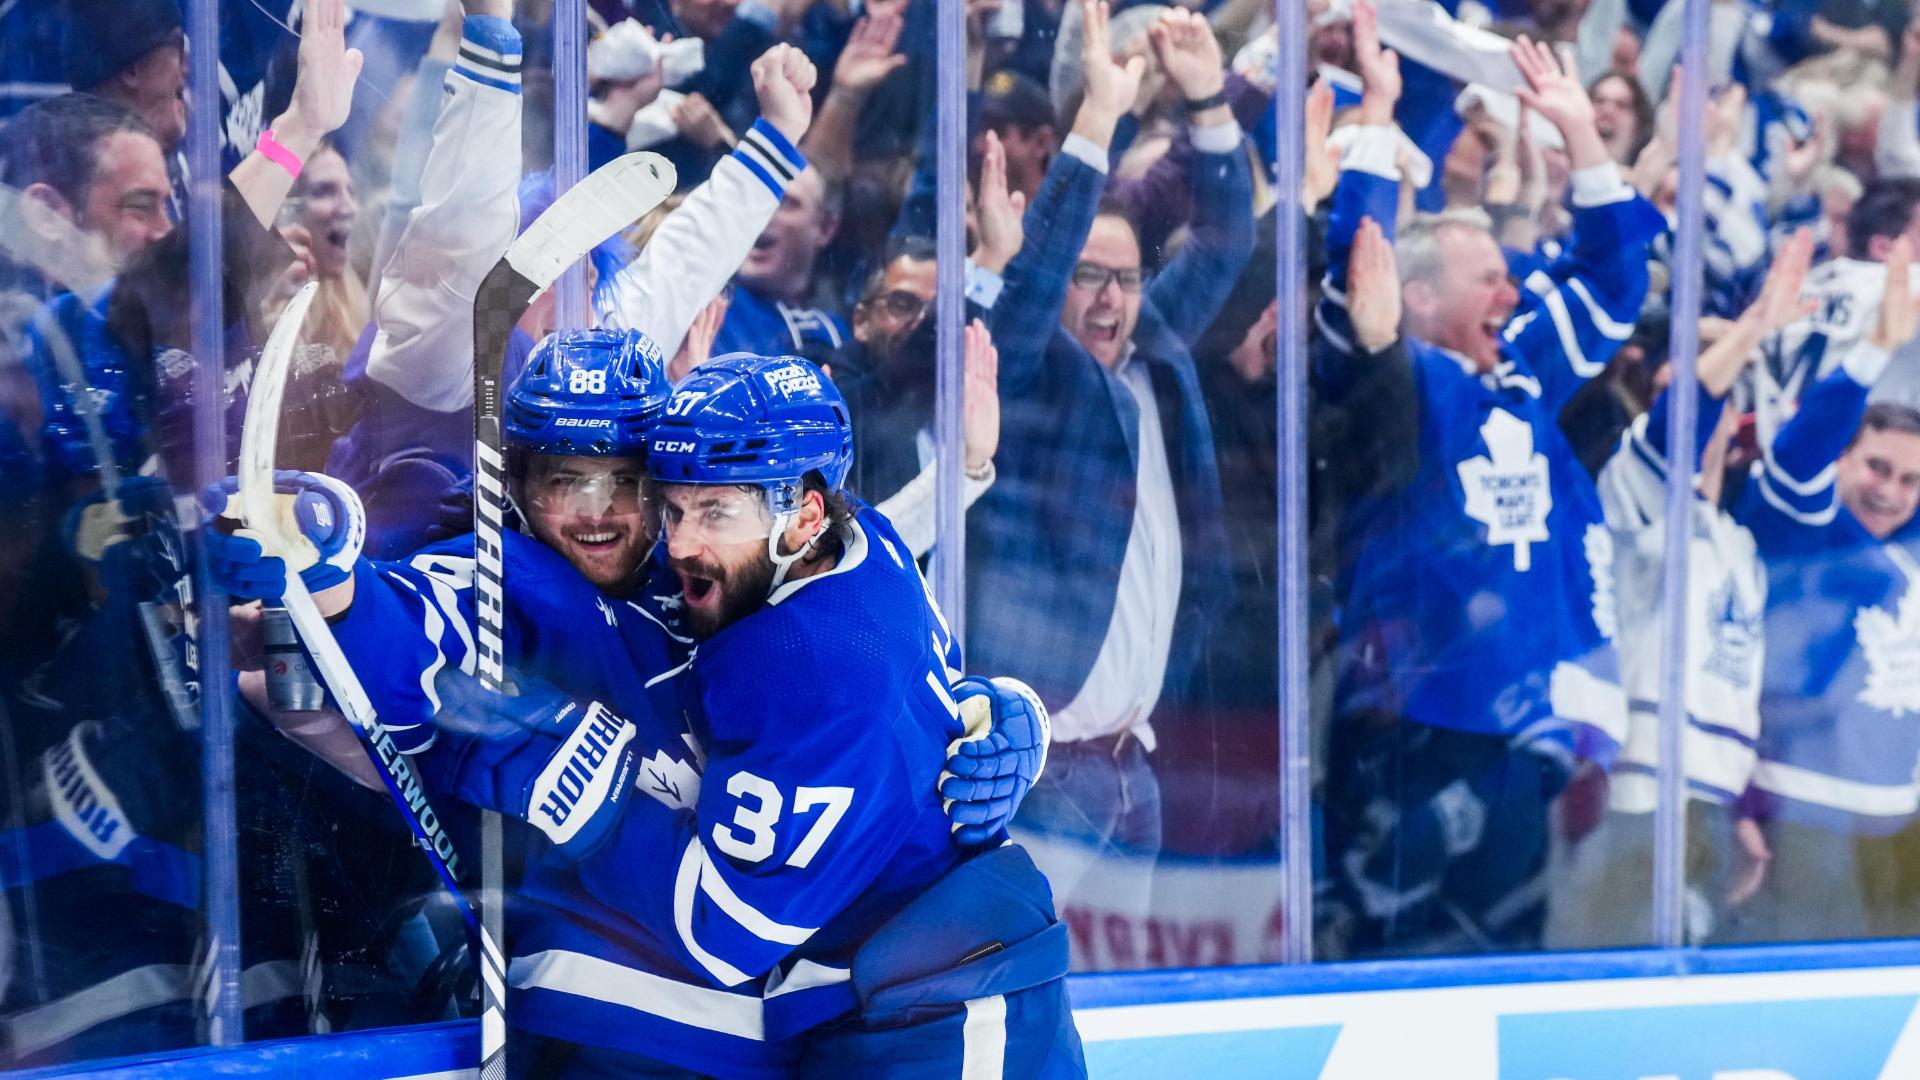 William Nylander's 2nd goal secures Game 7 for Maple Leafs